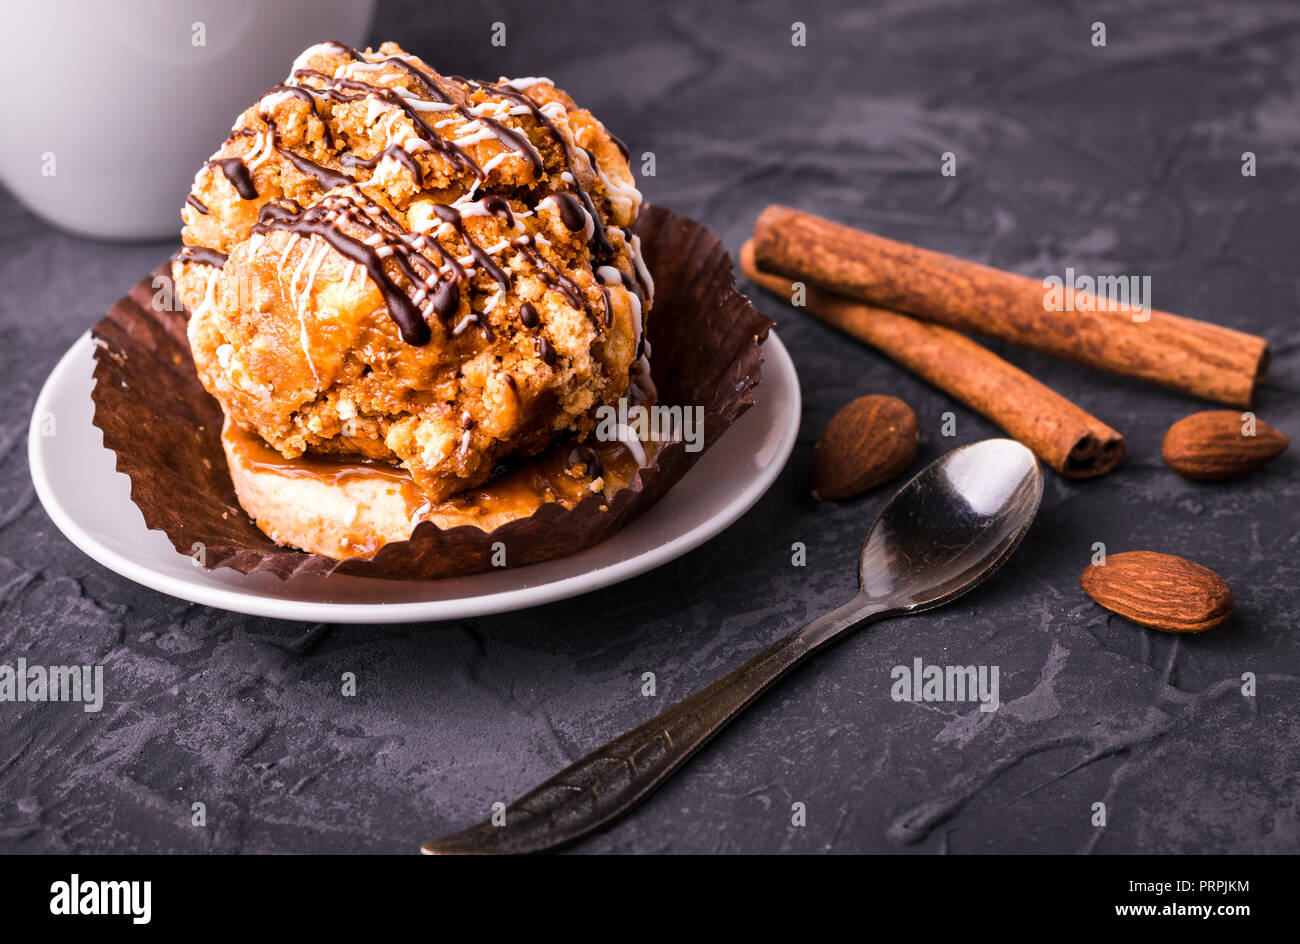 Delicious small cake dessert with caramel and chocolate. Close up view. On dark concrete stone background. Stock Photo